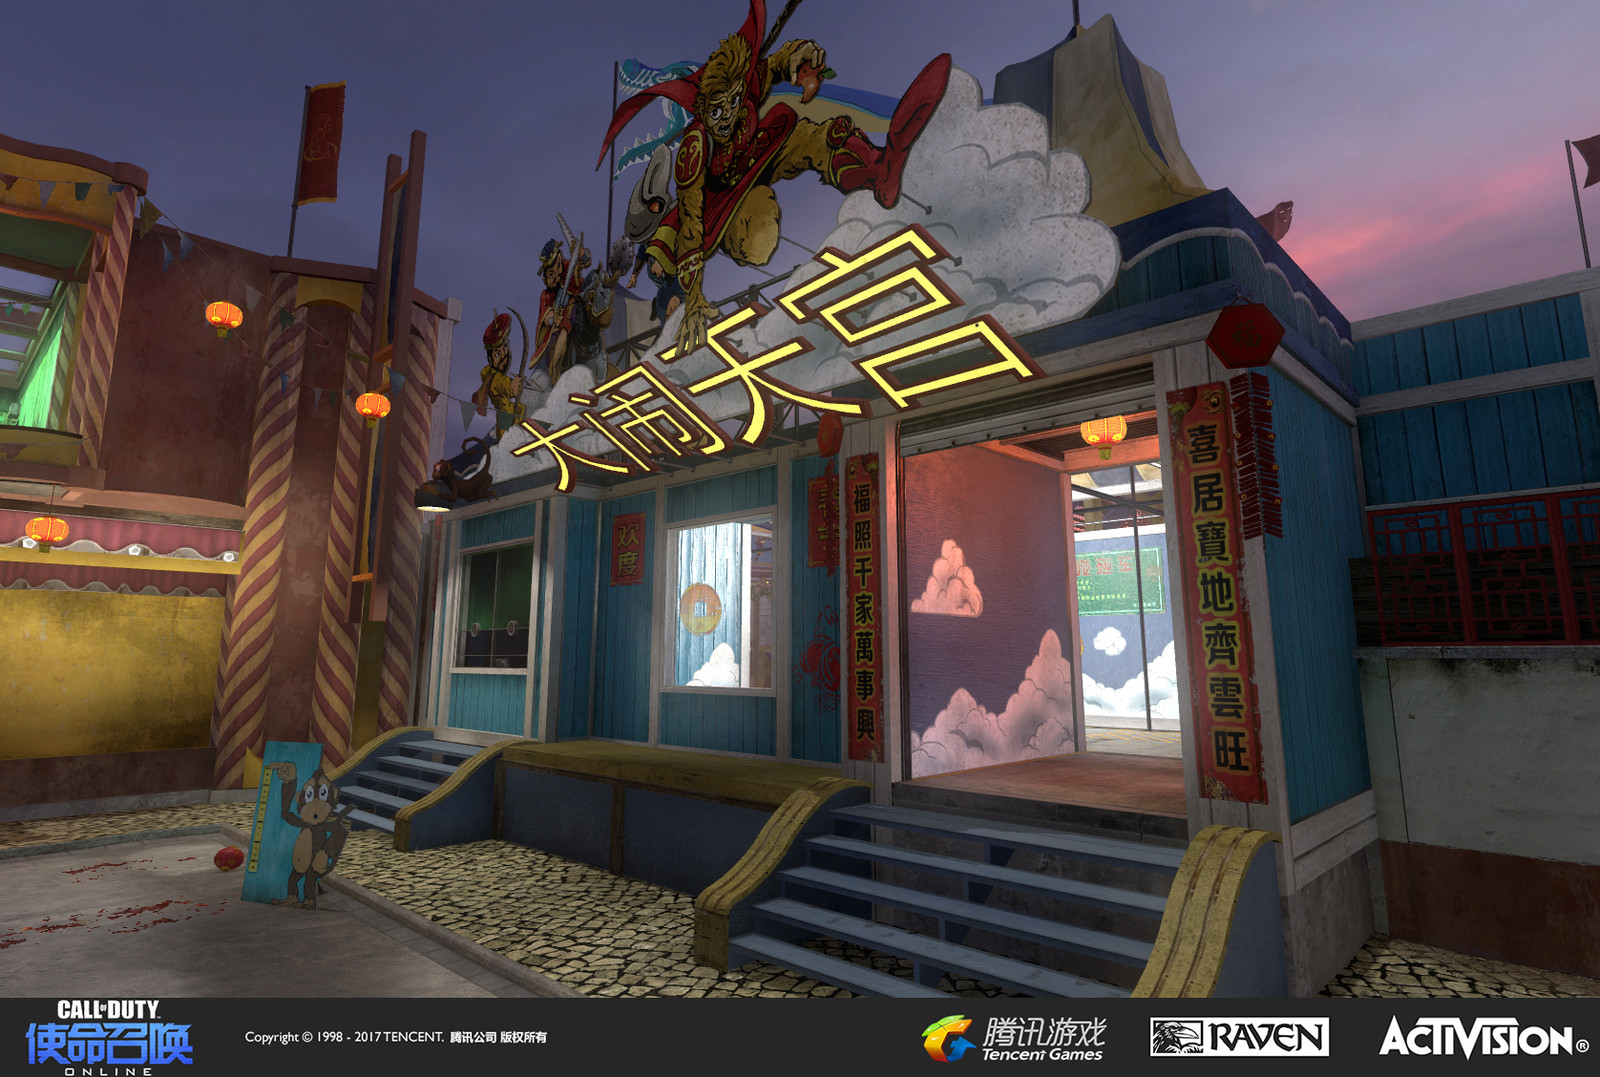 Carnival: I created the geo, texturing, set dress, and sign models for the roller coaster station of this map. The characters are my drawings and are animated to raise and lower.